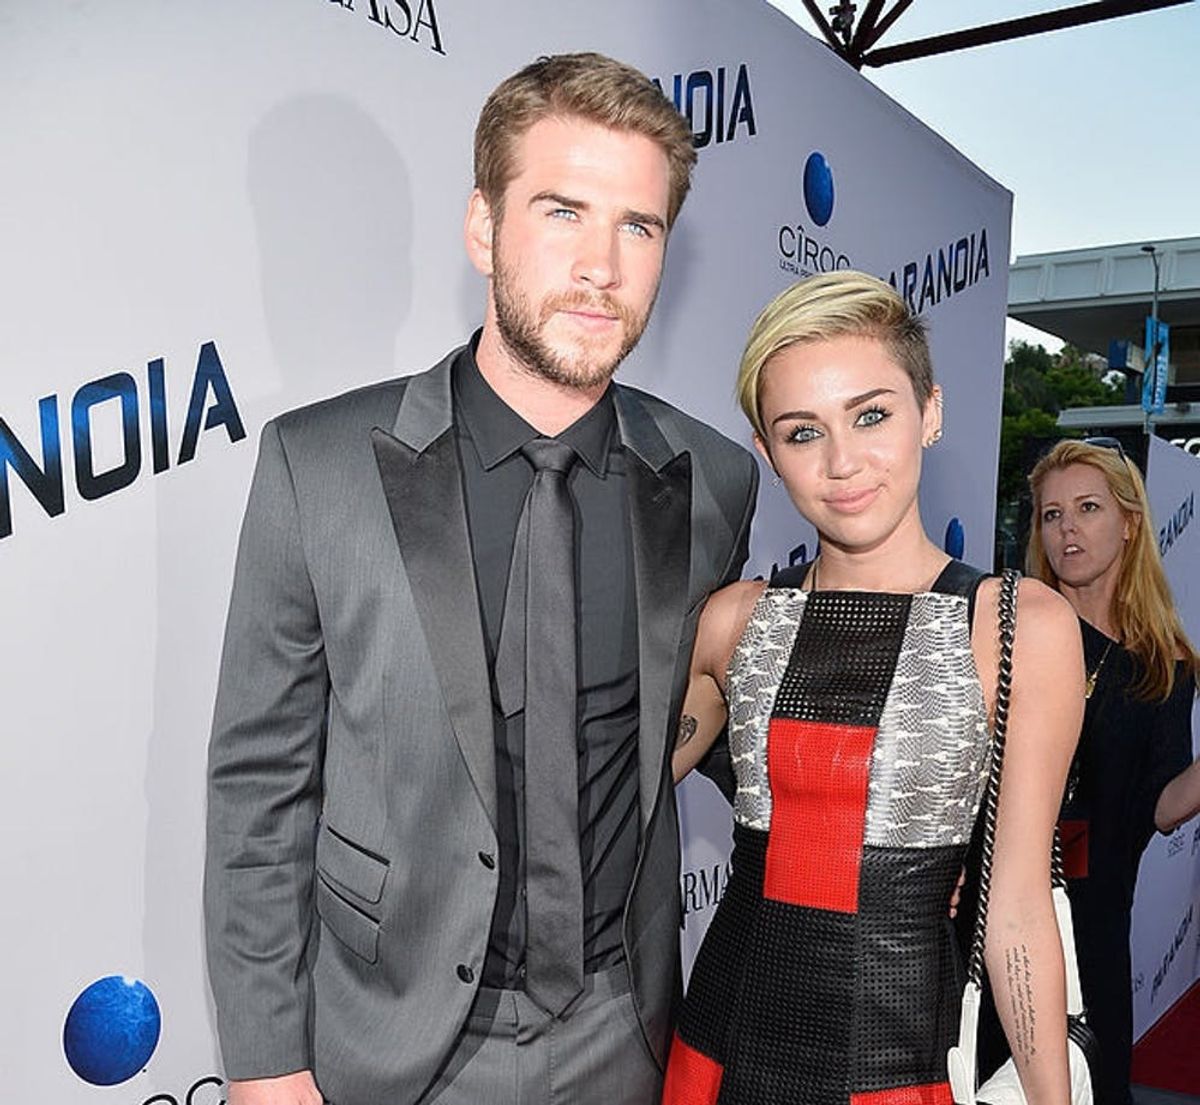 Miley Cyrus Can’t Stop Writing Songs About Liam Hemsworth and This Sweet Pic Proves It